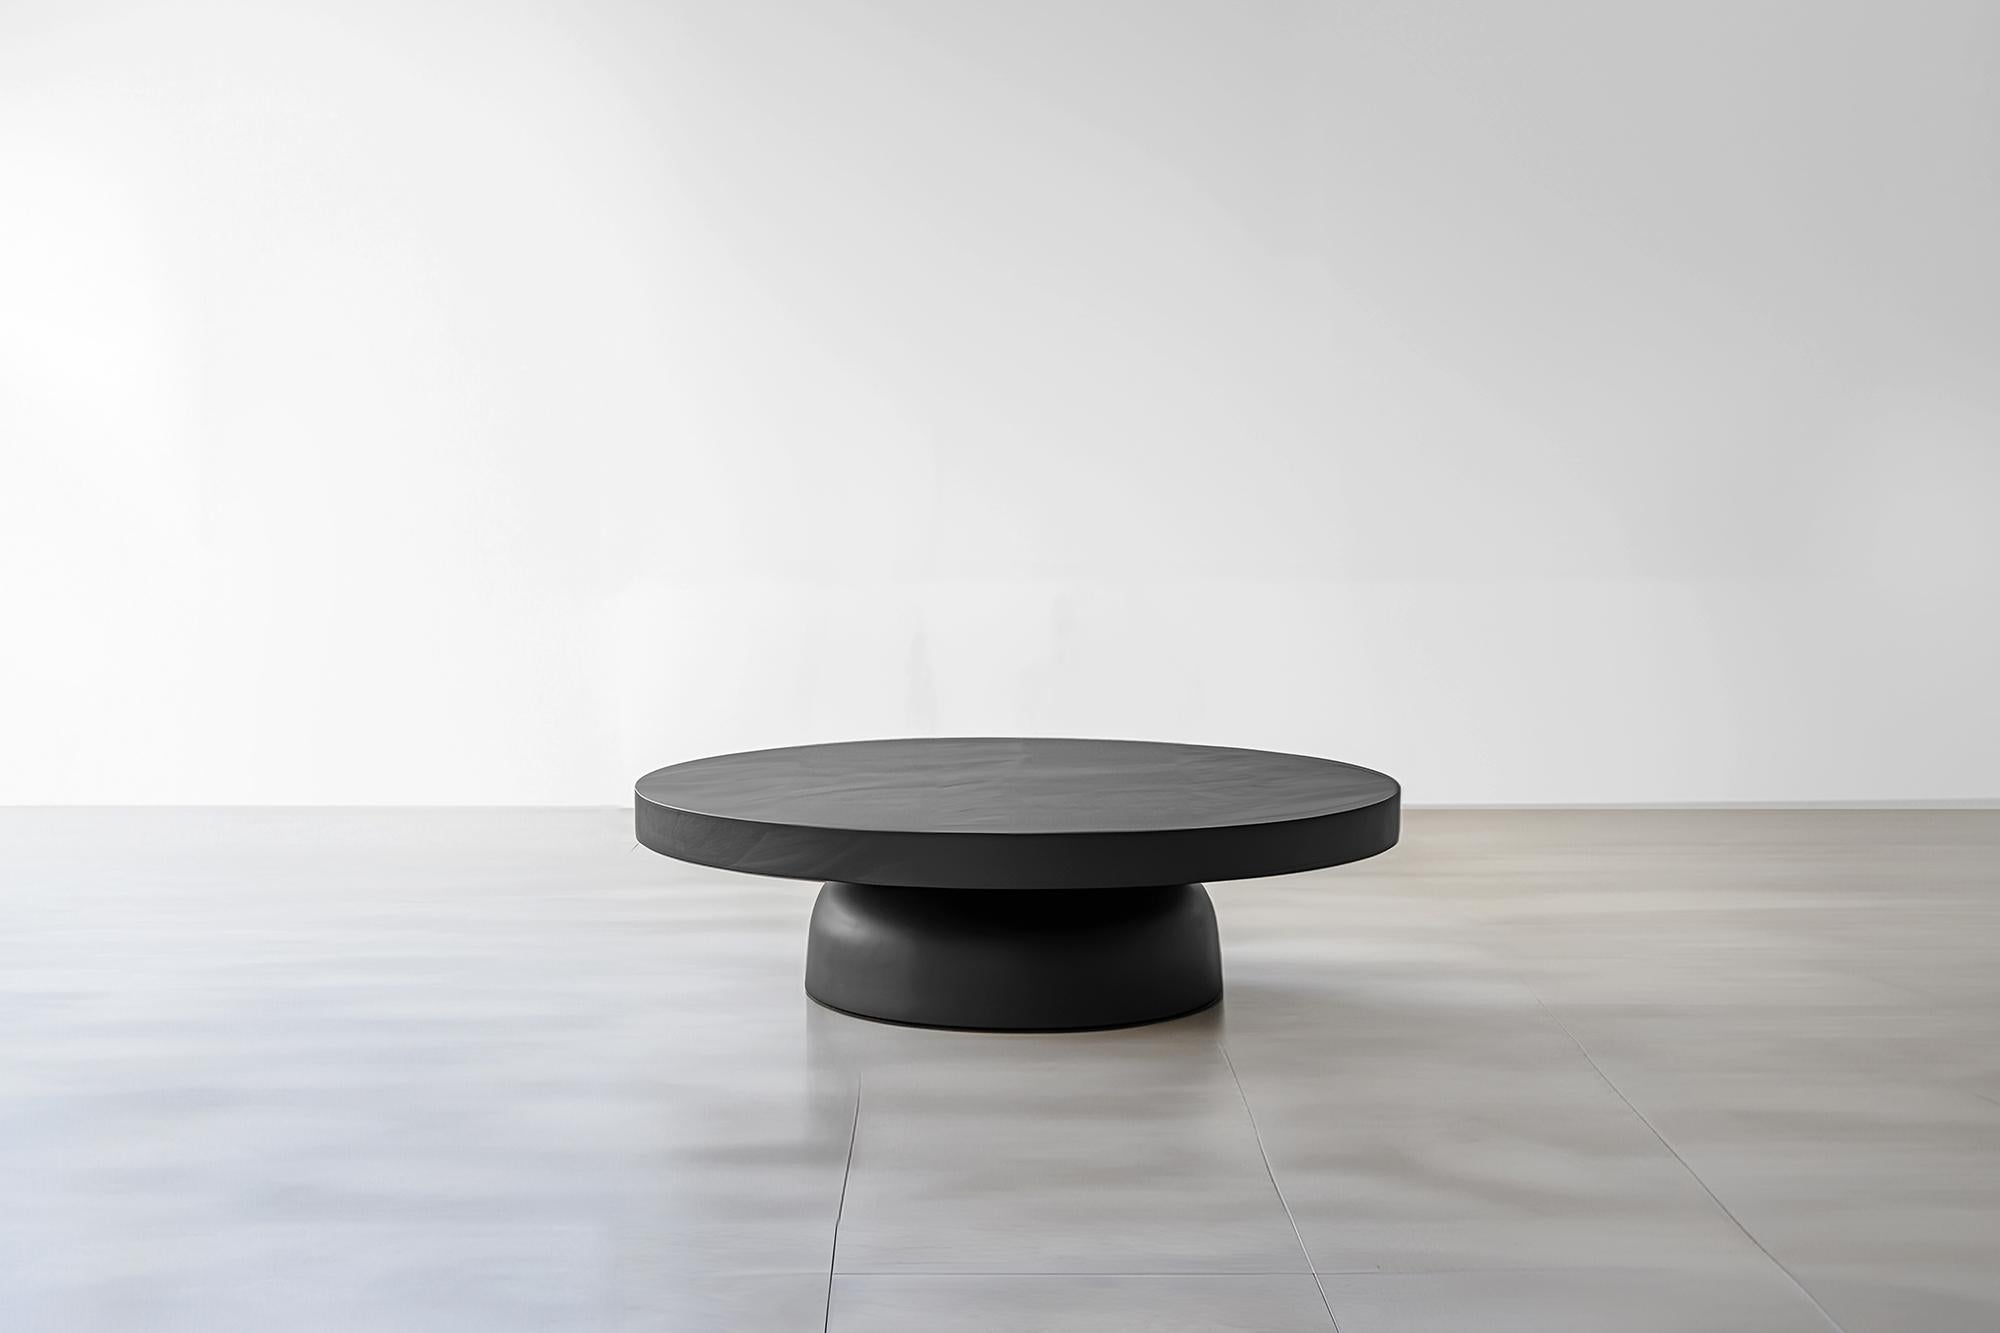 Minimalist Black Round Coffee Table - Sleek Fundamenta 31 by NONO

Sculptural coffee table made of solid wood with a natural water-based or black tinted finish. Due to the nature of the production process, each piece may vary in grain, texture,